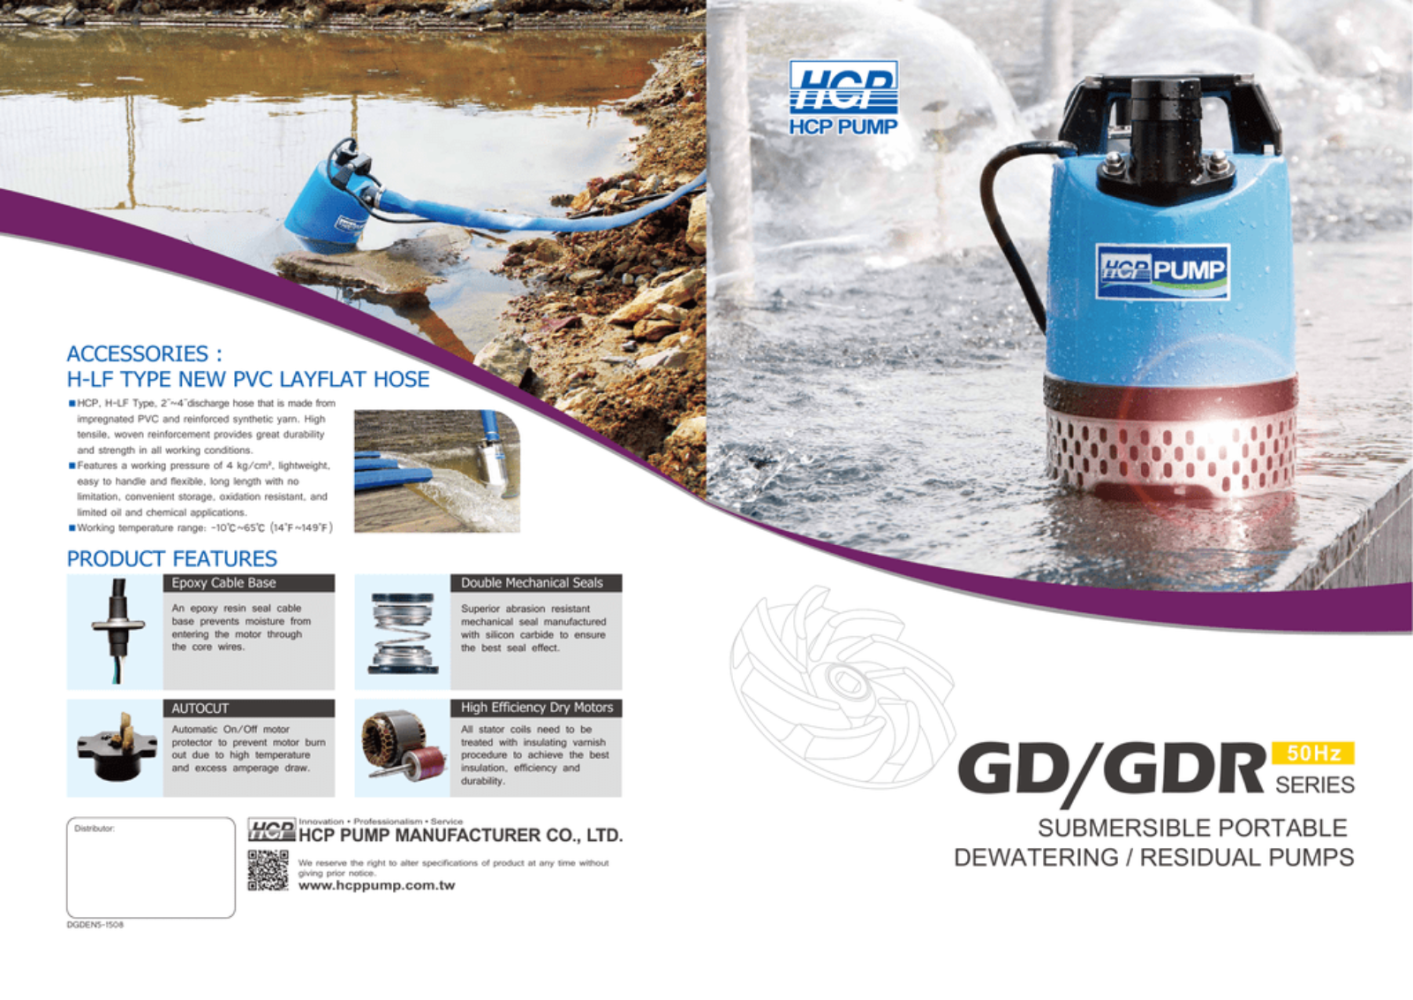 HCP GD400 / GD400F SUBMERSIBLE PUMP - MANUAL/ AUTO, DISCHARGE 2", 230V, 400W, MAX HEAD 10M, FLOW RATE 210L/MIN, 10.5KG